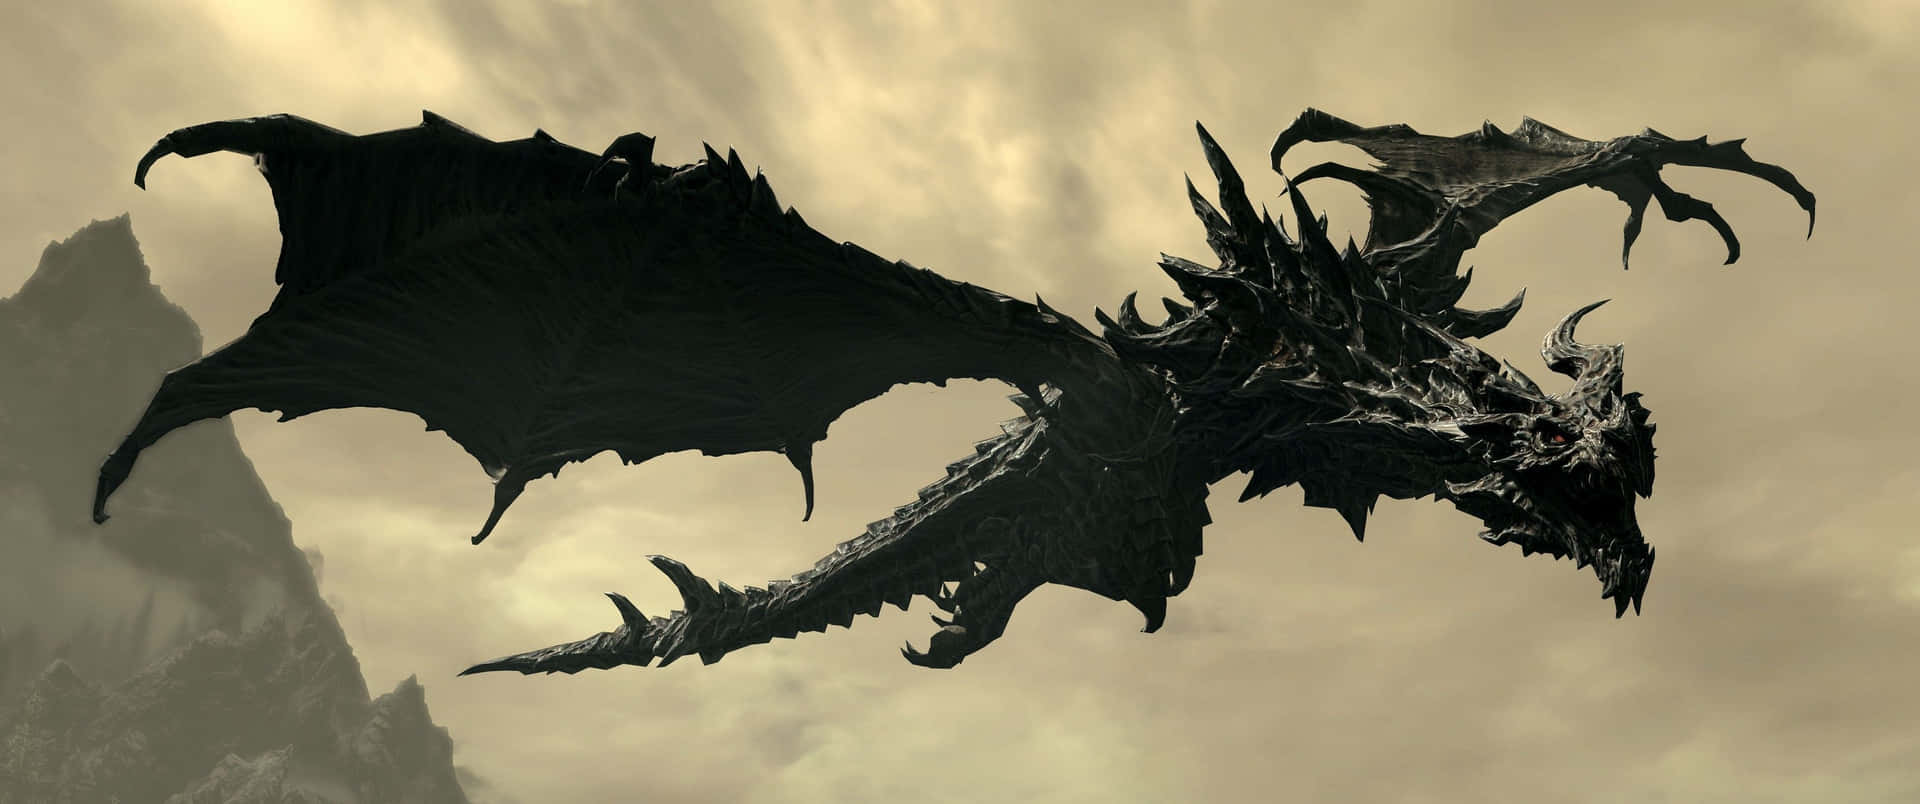 "Alduin, the World-Eater, looms above in the skies of Skyrim" Wallpaper